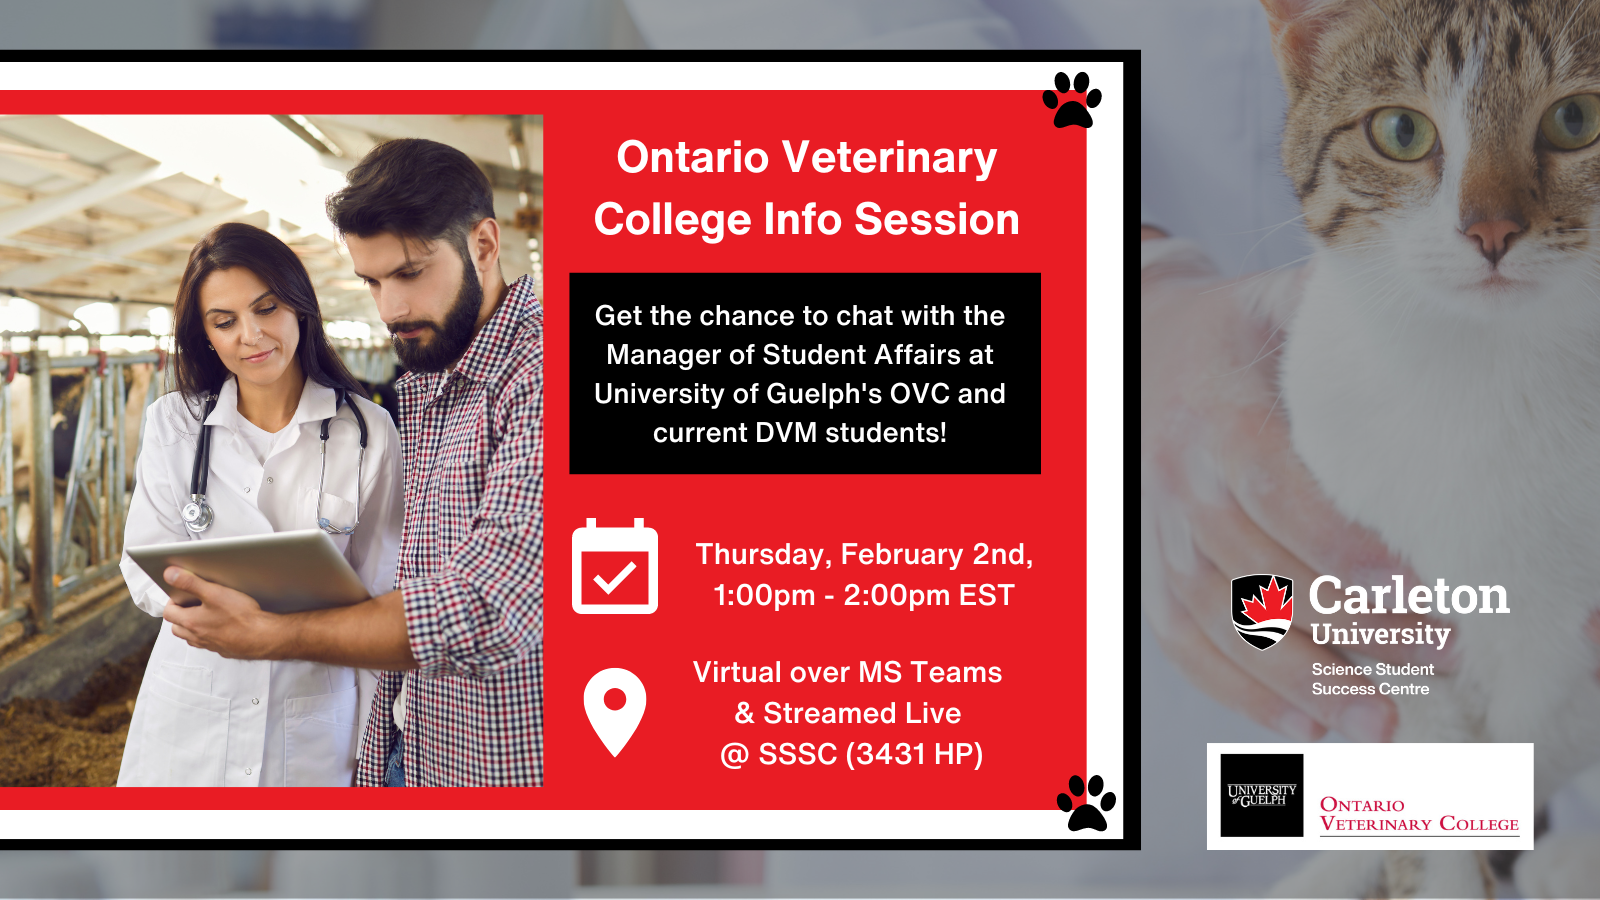 Poster with text. Background image of a cat sitting on a table, held by a veterinarian. Text above and below an image shown in a red box square off to the left with a thick white border then an outer black border. Text above reads: Ontario Veterinary College Info Session. Get the chance to chat with the Manager of Student Affairs at University of Guelph's OVC and current DVM students! Another image shown of a vet and a farmer looking over a clipboard with cows in the background. Text below reads: Thursday, February 2nd, 1:00pm - 2:00pm EST. Virtual over MS Teams & Streamed Live @ SSSC (3431 HP). Carleton University, Science Student Success Centre. University of Guelph, Ontario Veterinary College.